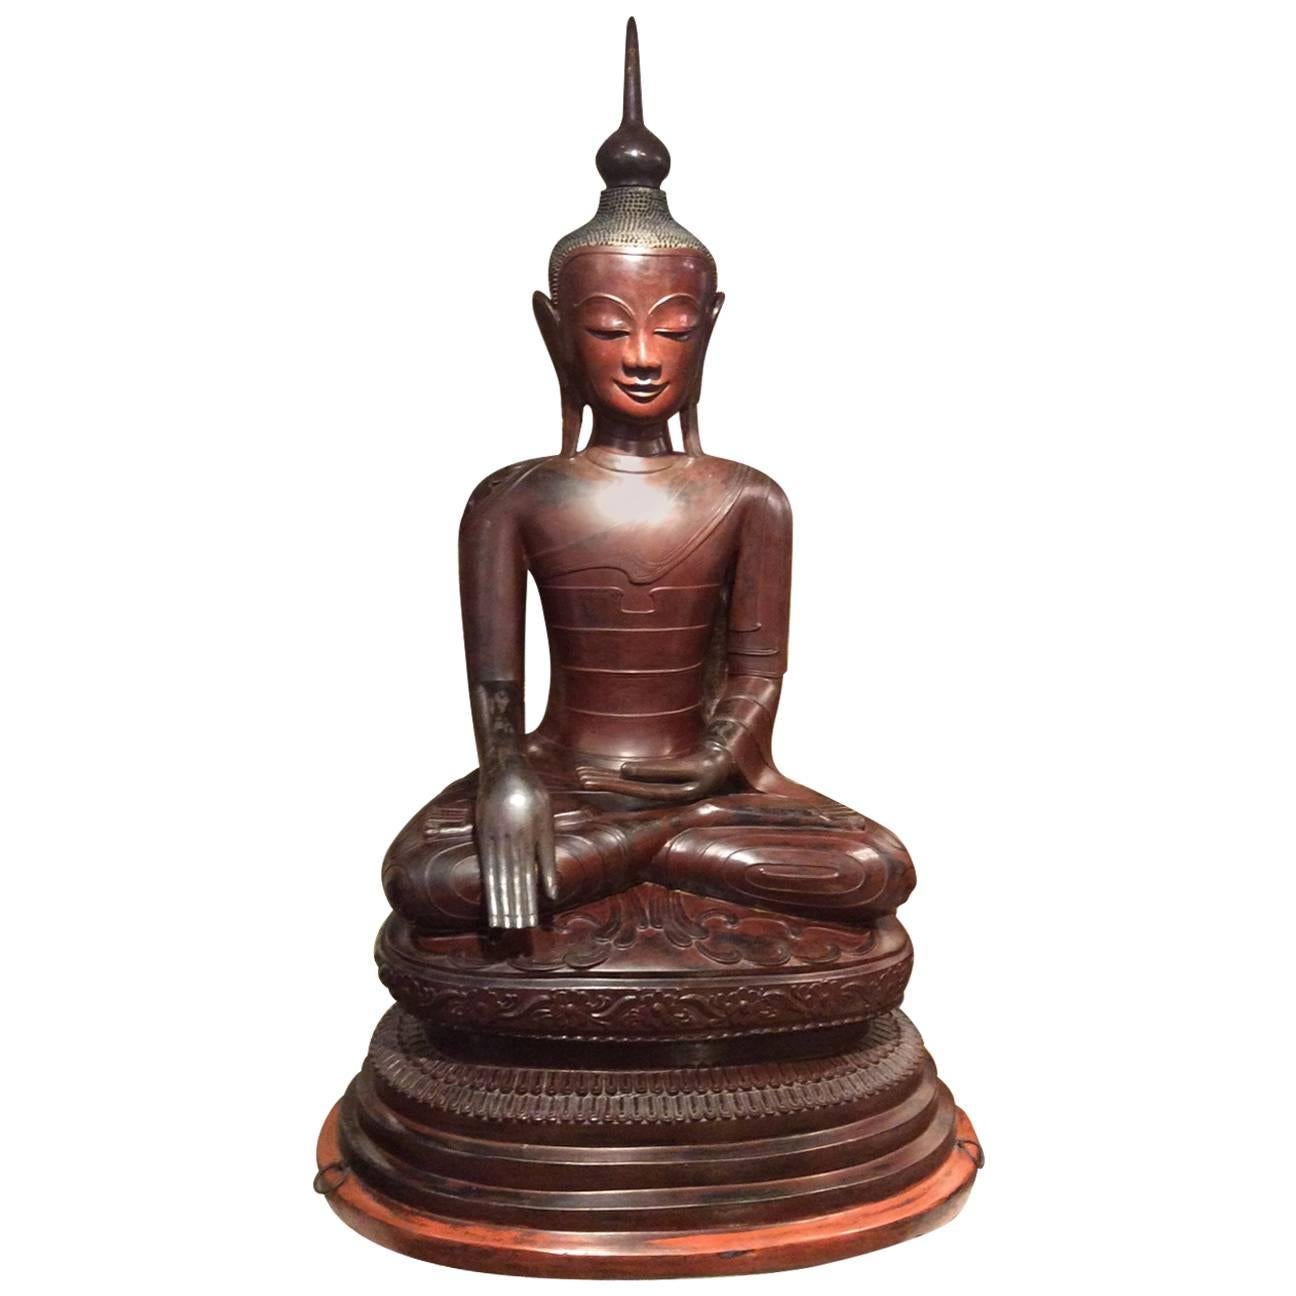 Huge Buddha Statue in Lacquer from the Region of Shan, Burma